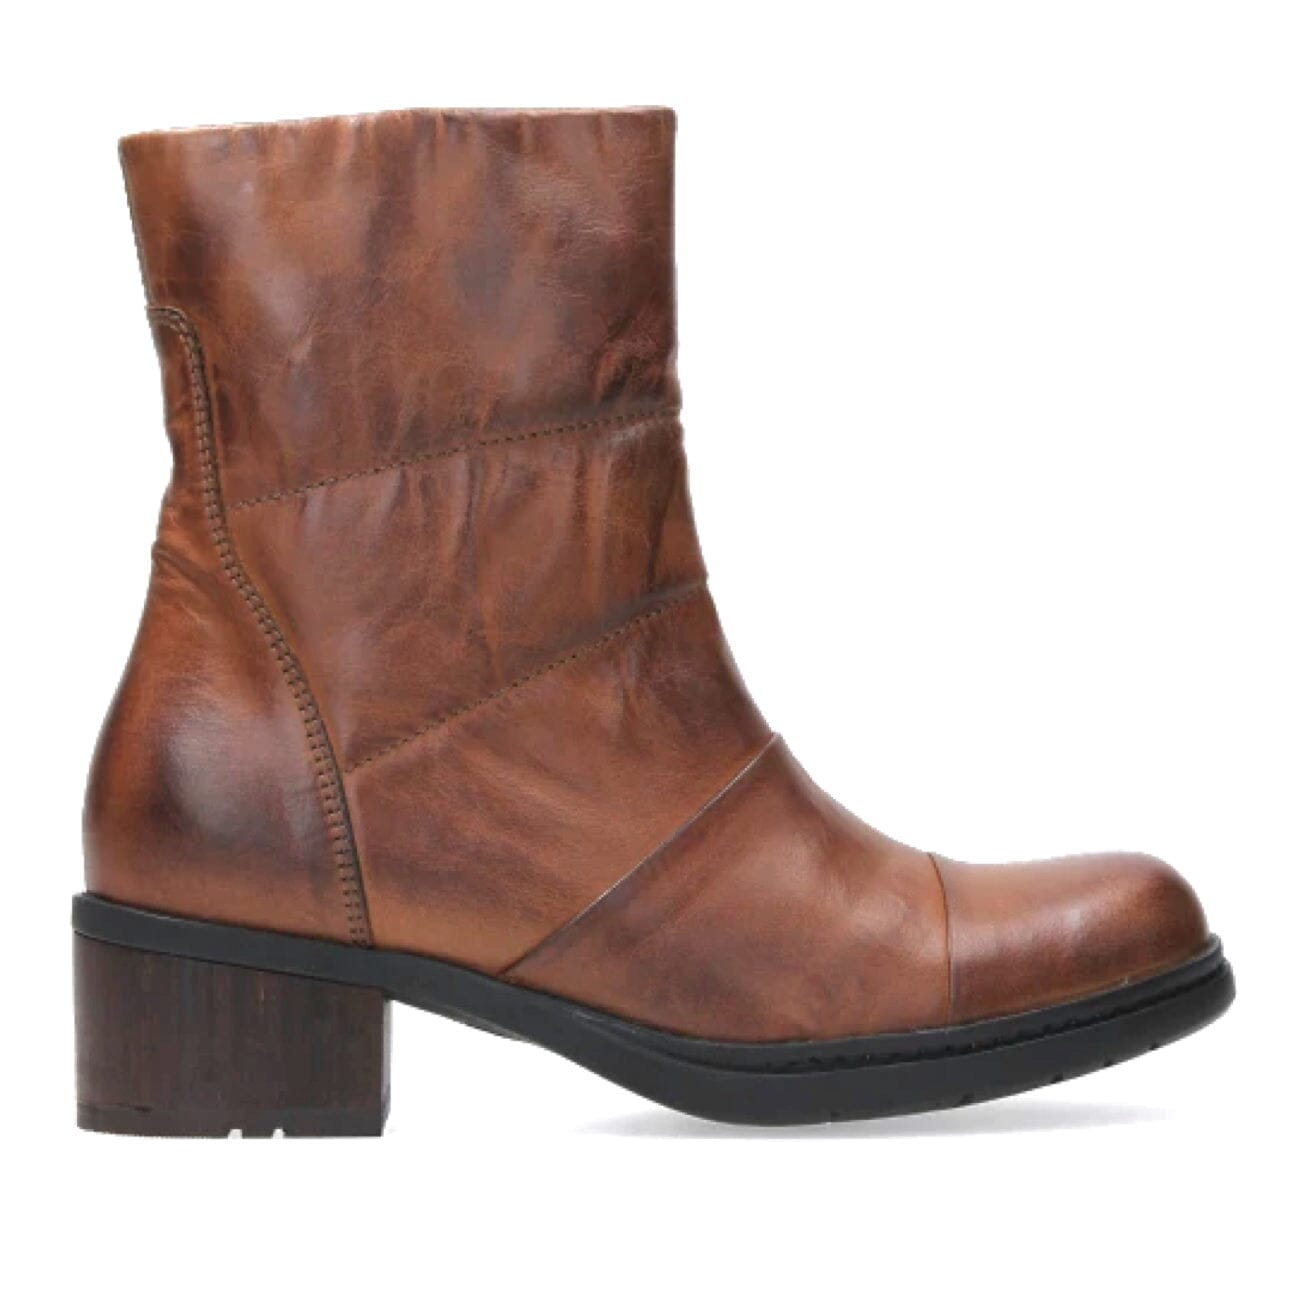 Wolky, Hinton, Boots, Leather, Cognac Boots Wolky Cognac 37 